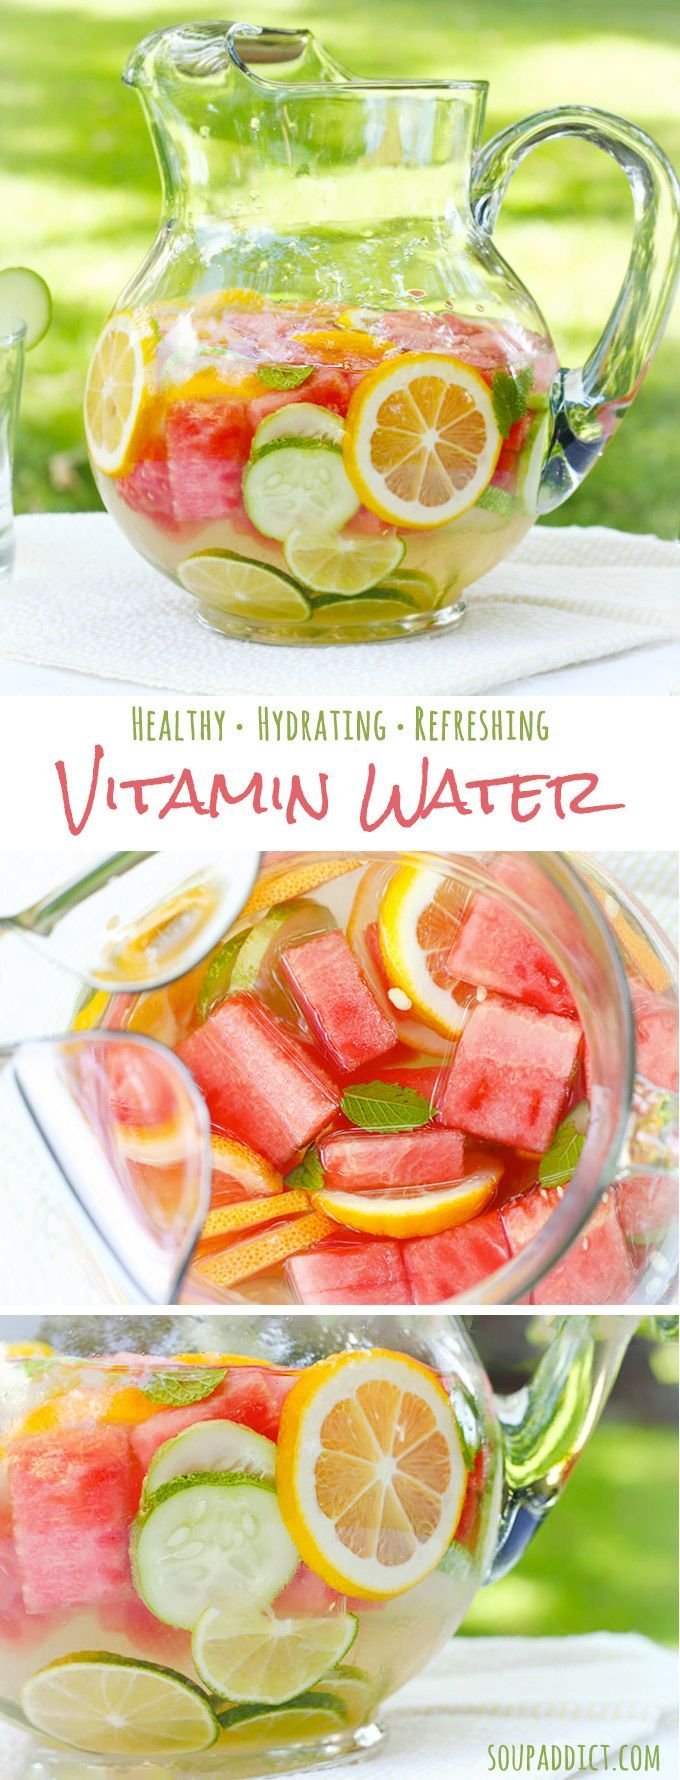 Refreshing, nourishing fruit and herb infused water – great for hydrating on hot summer days!